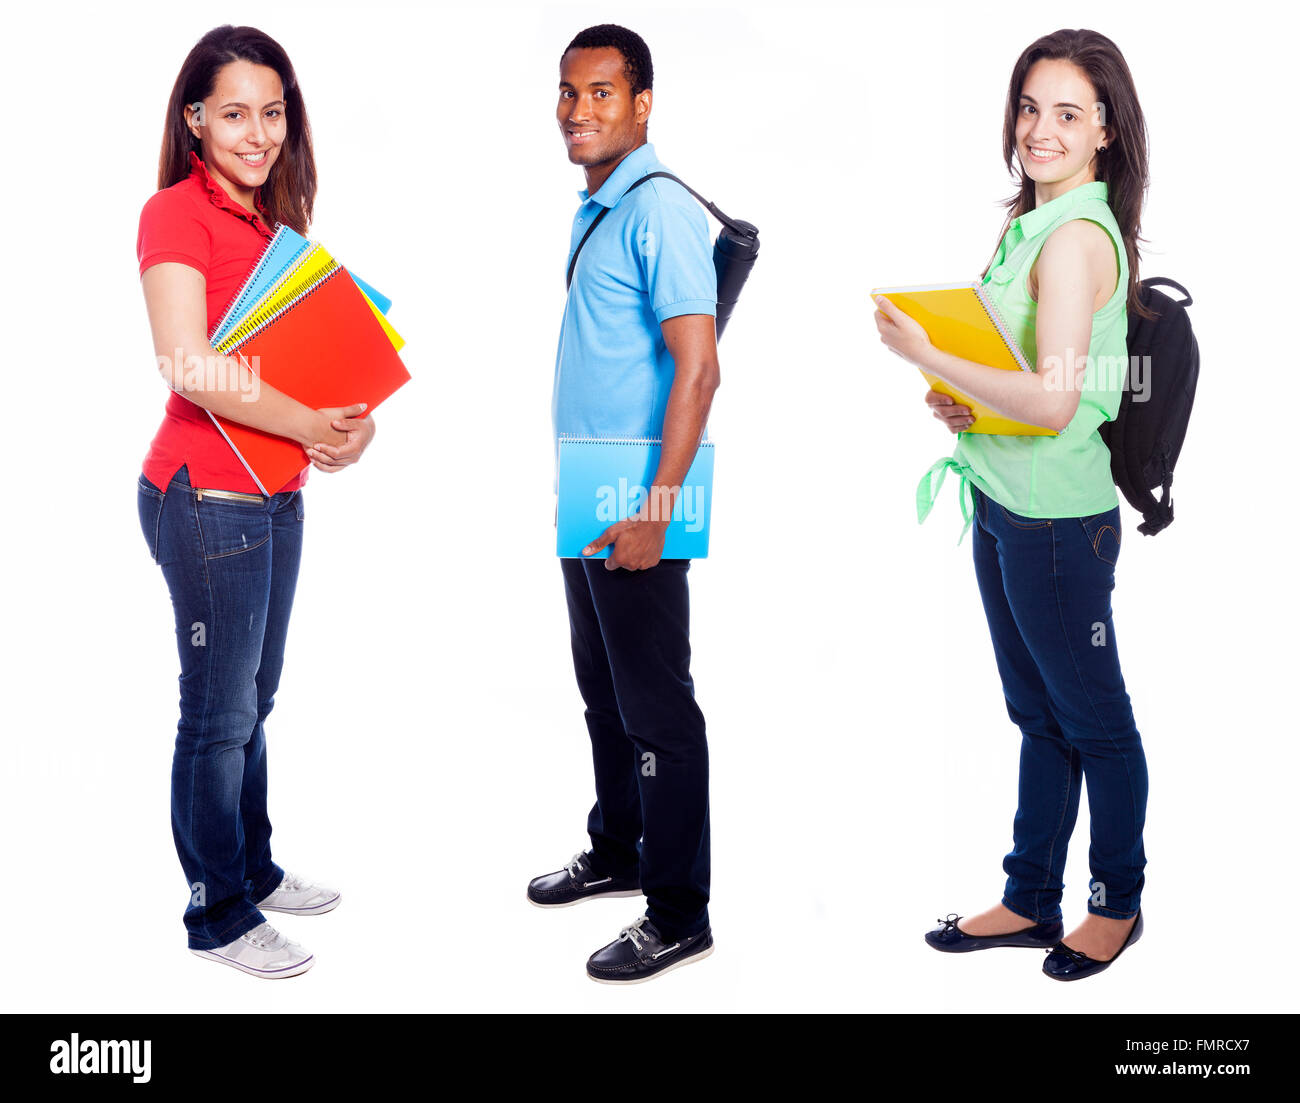 Group of college students on white background Stock Photo